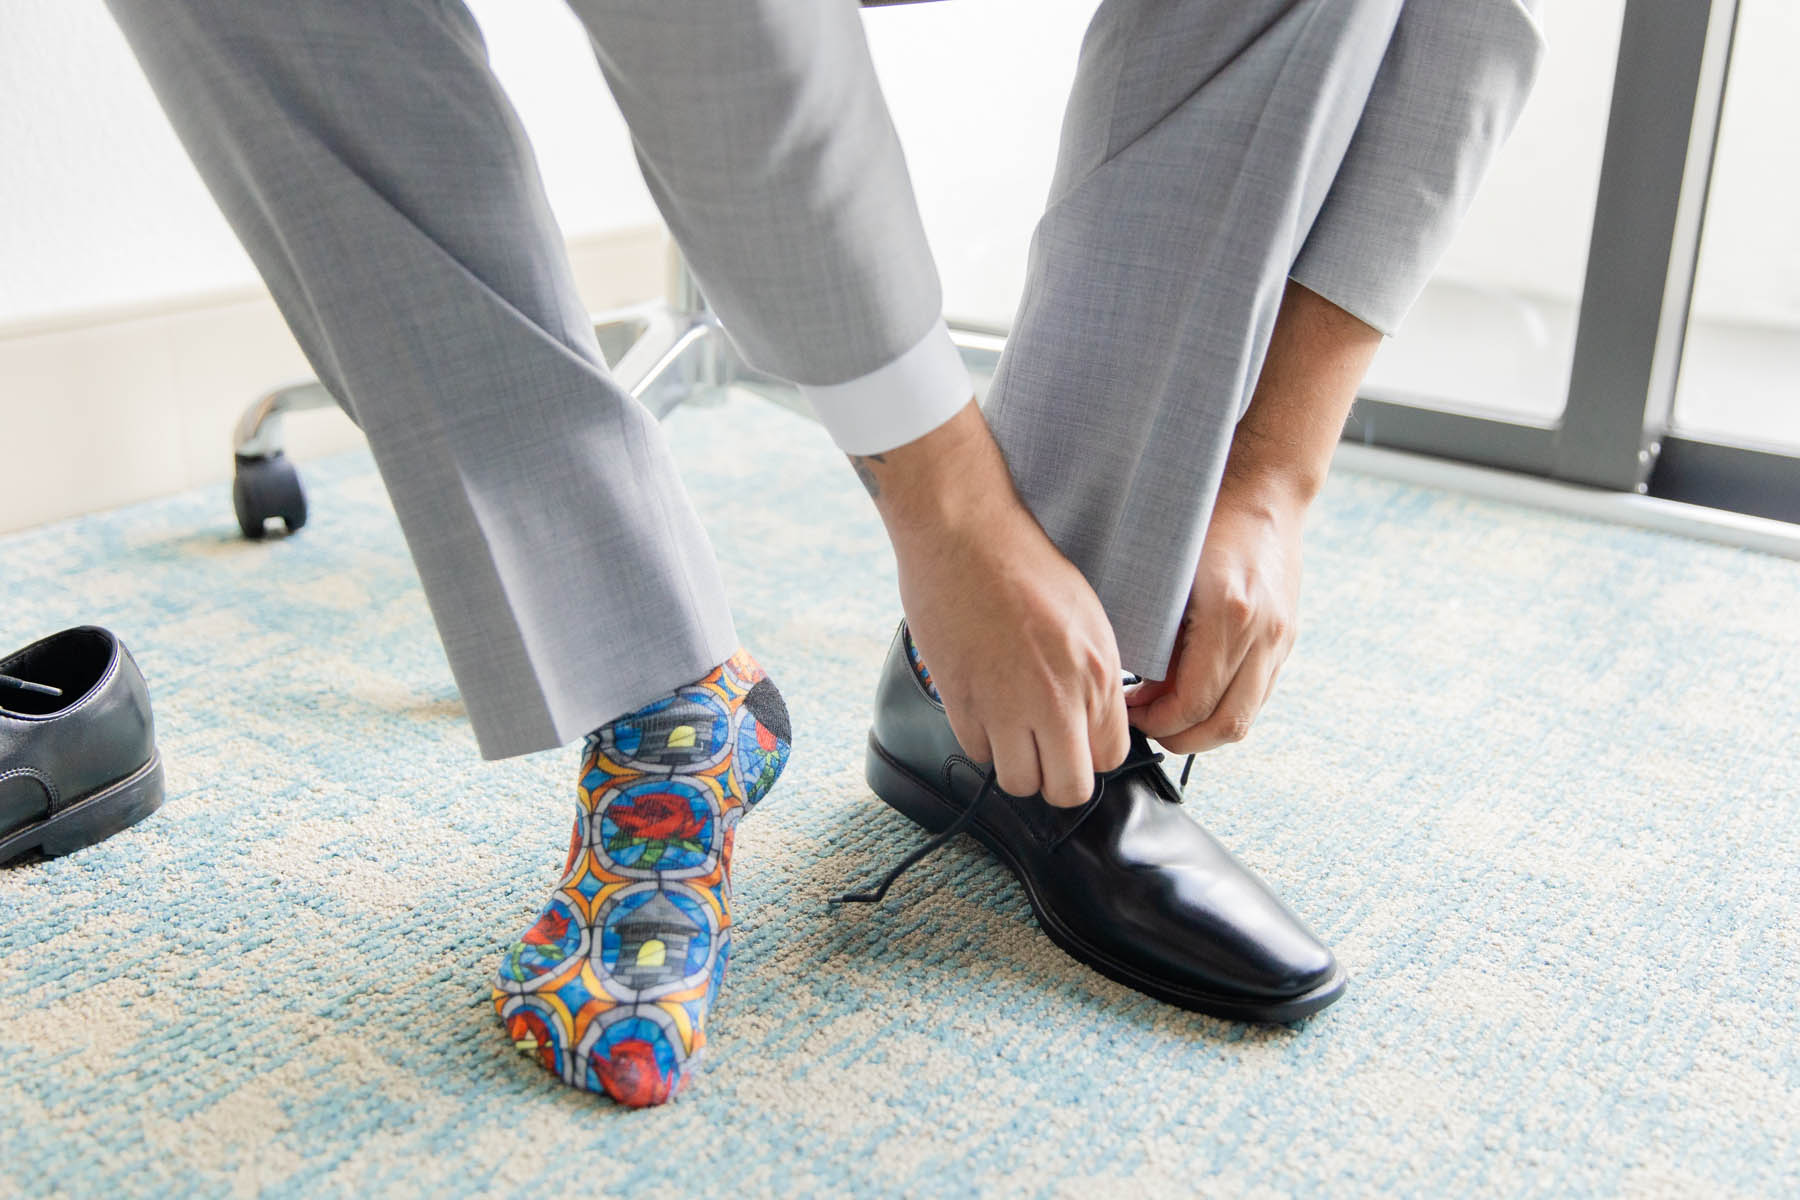 A groom puts on a shoe. On his other foot, he is wearing a sock that is designed like stained glass.